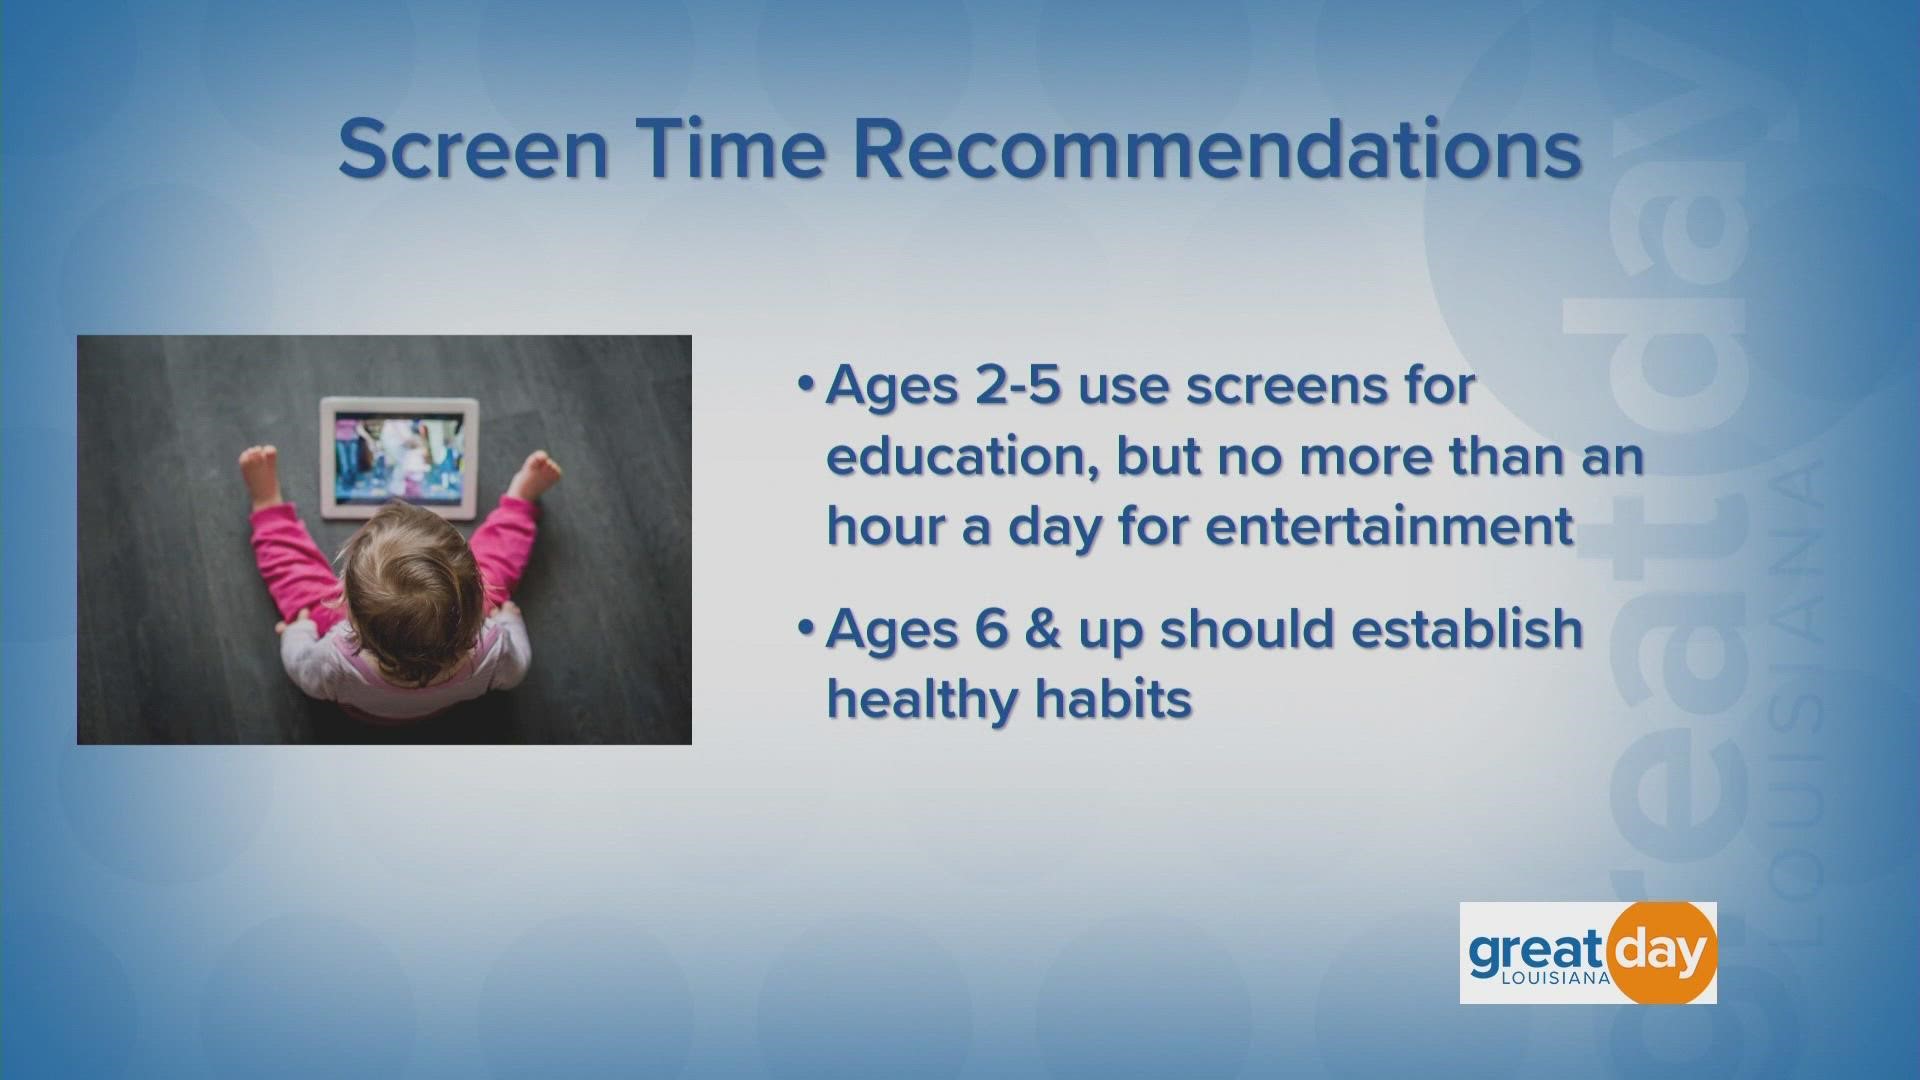 Play therapist Kenneth Schmitt shared some screen time guidelines for all ages.